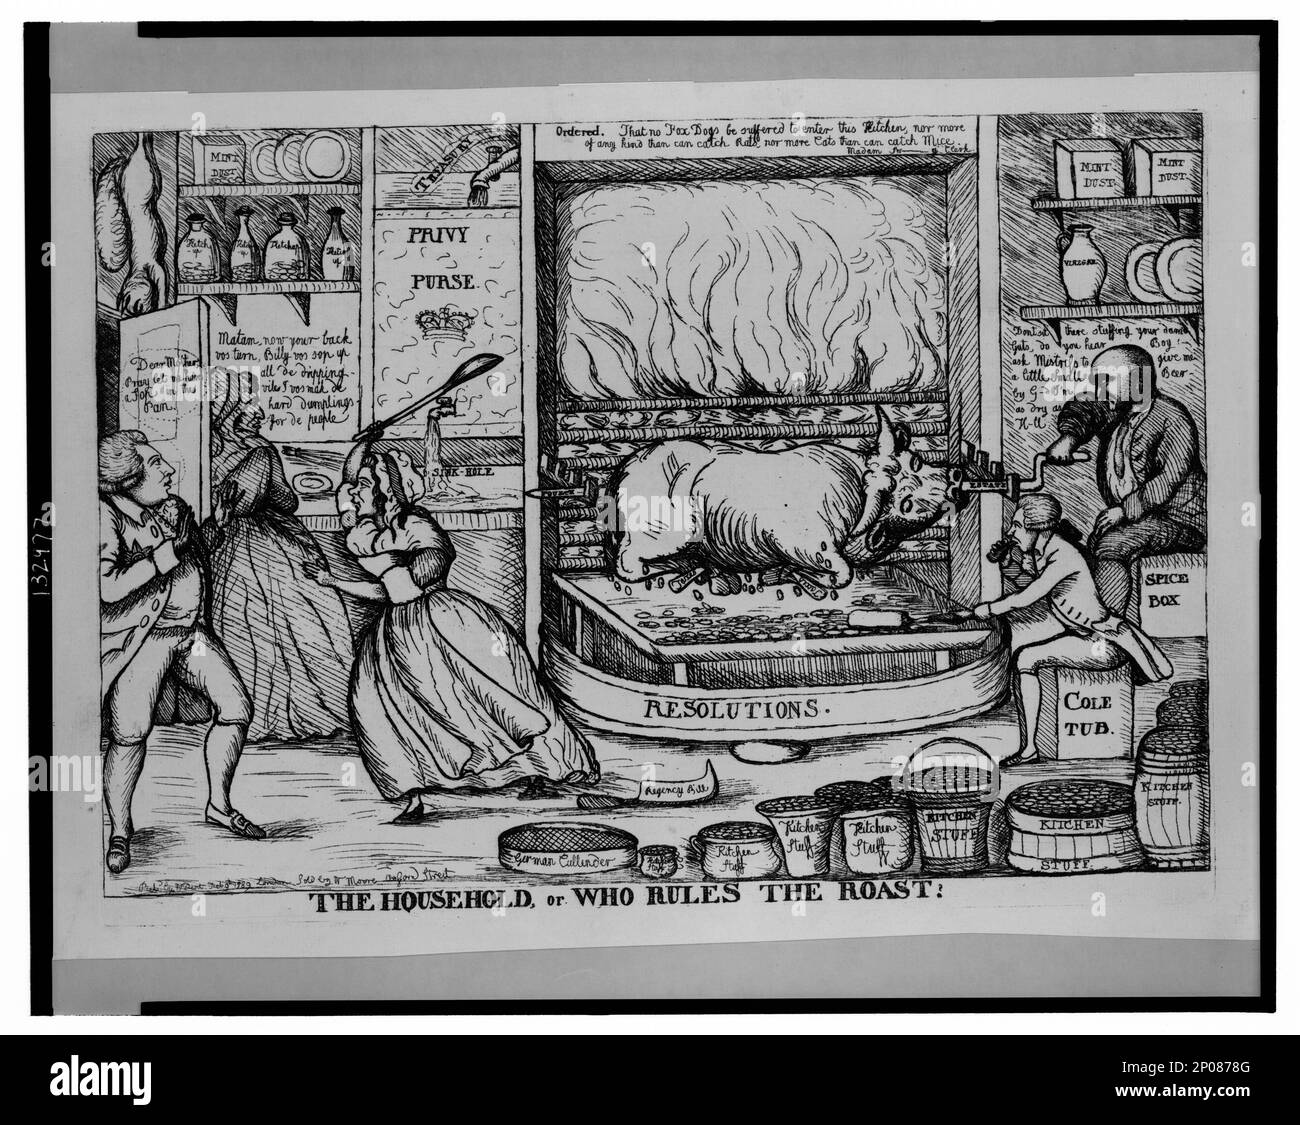 The Household, or who rules the roast!. British Cartoon Prints Collection . George,IV,King of Great Britain,1762-1830. , Bulls,England,1780-1790. , Cookery,England,1780-1790. , Treasuries,England,1780-1790. , Kitchens,England,1780-1790. Stock Photo